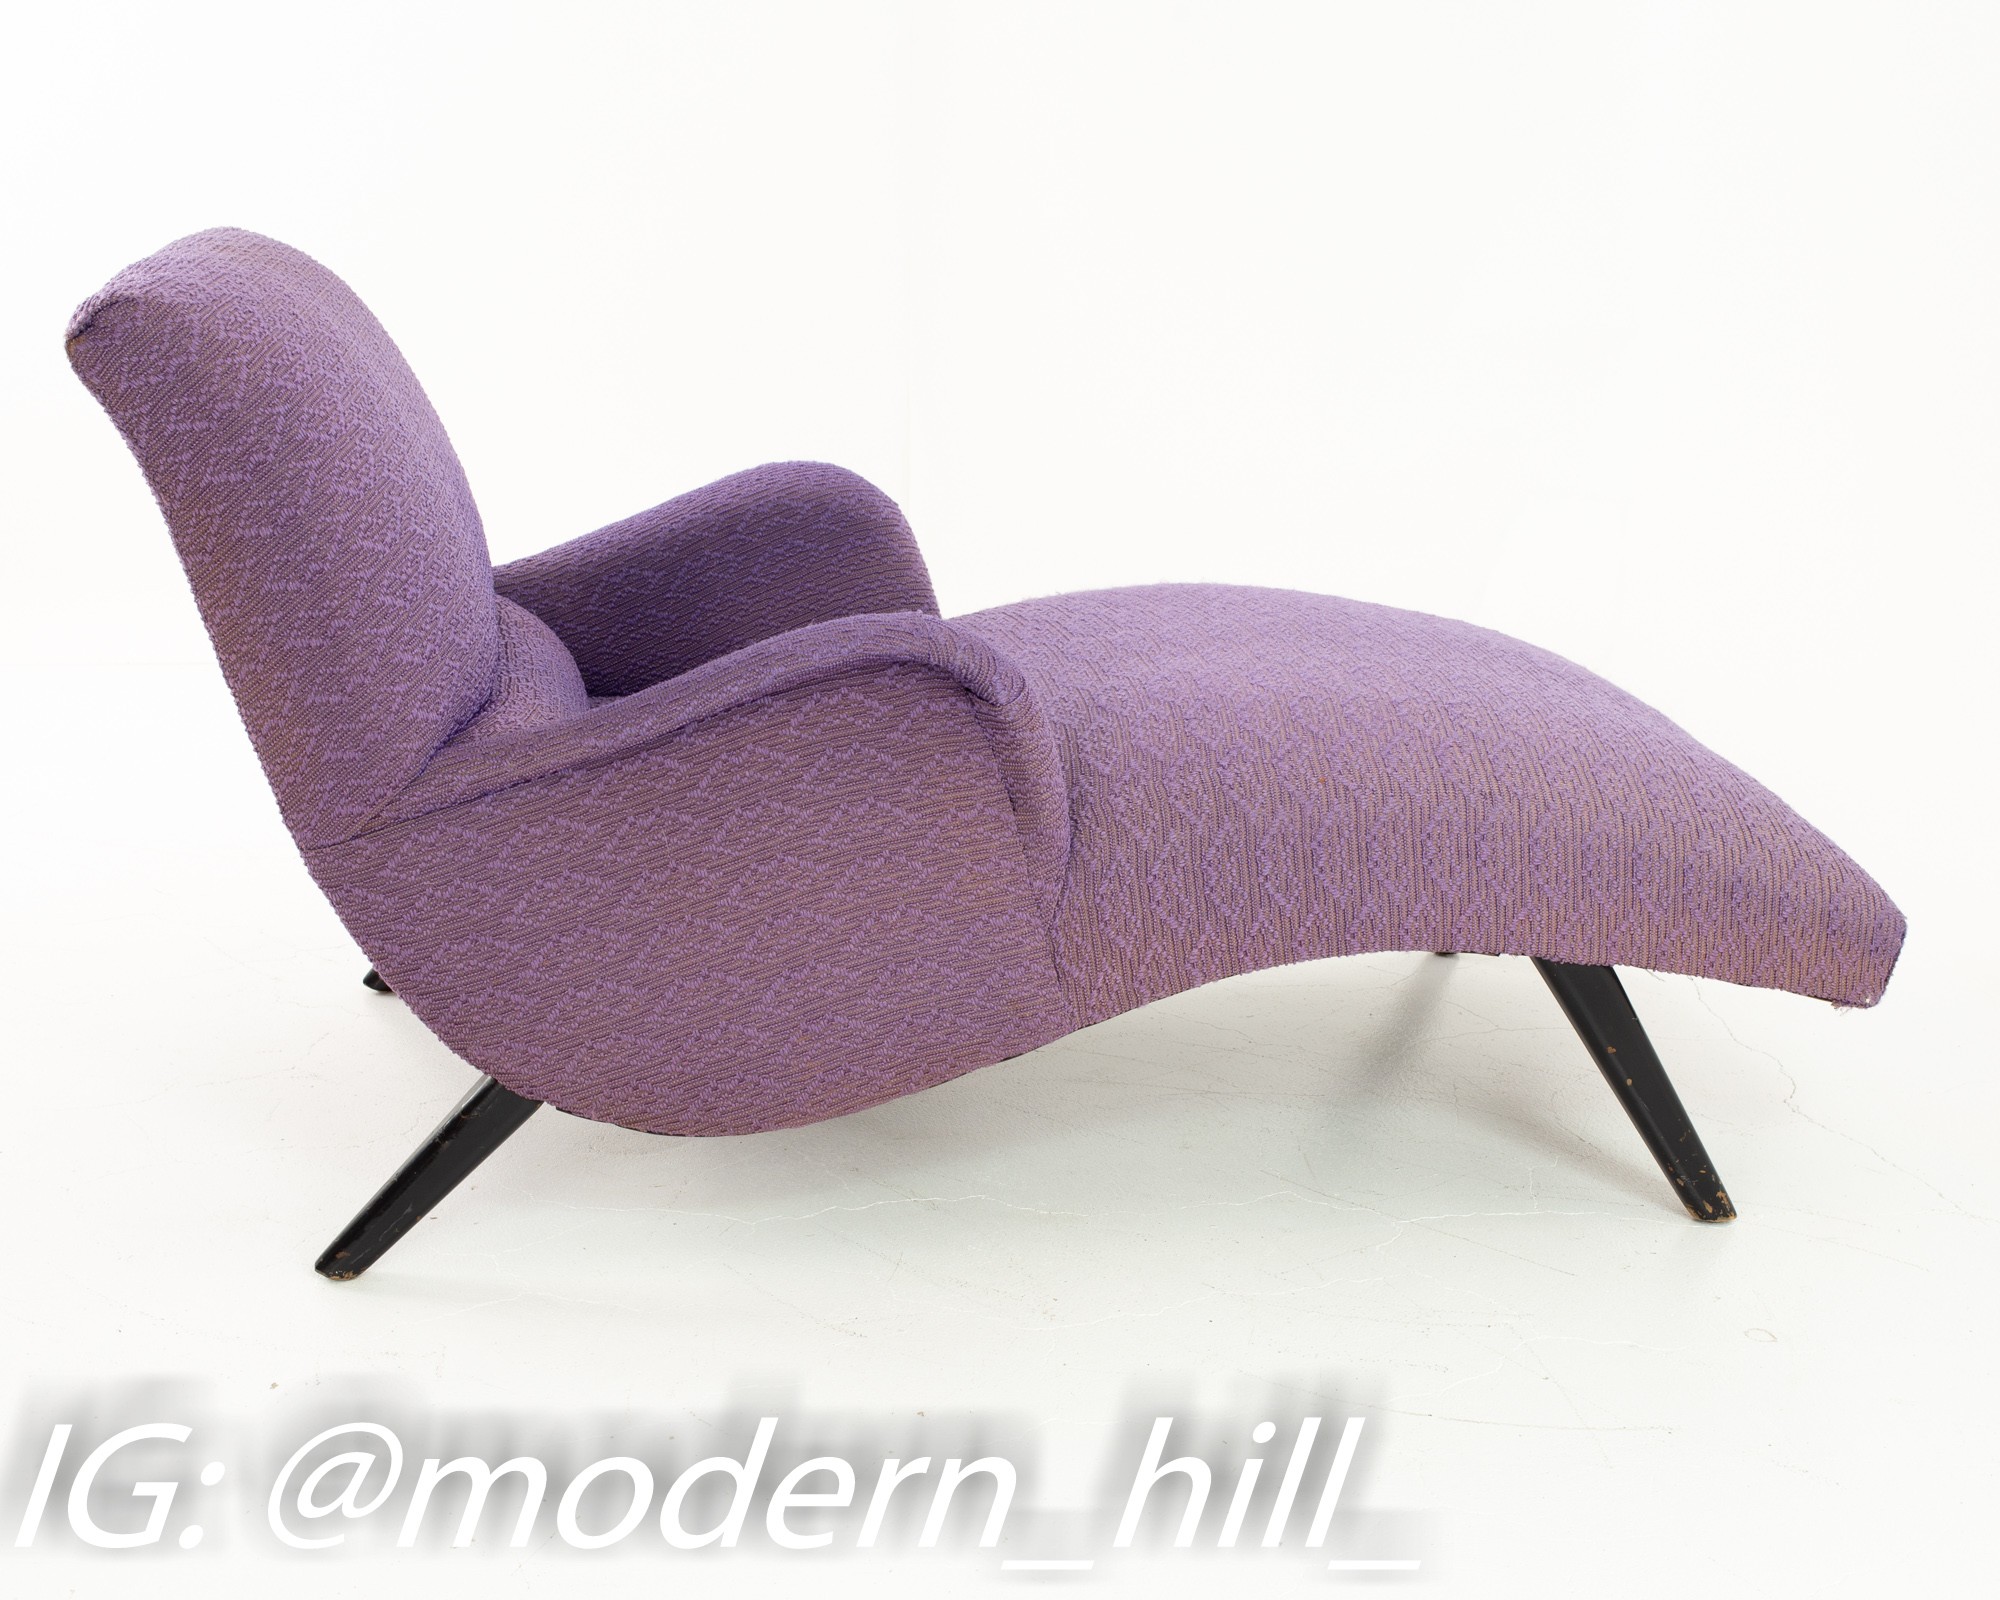 Greta Magnusson Grossman for Chaircraft Mid Century Chaise Lounge Chair